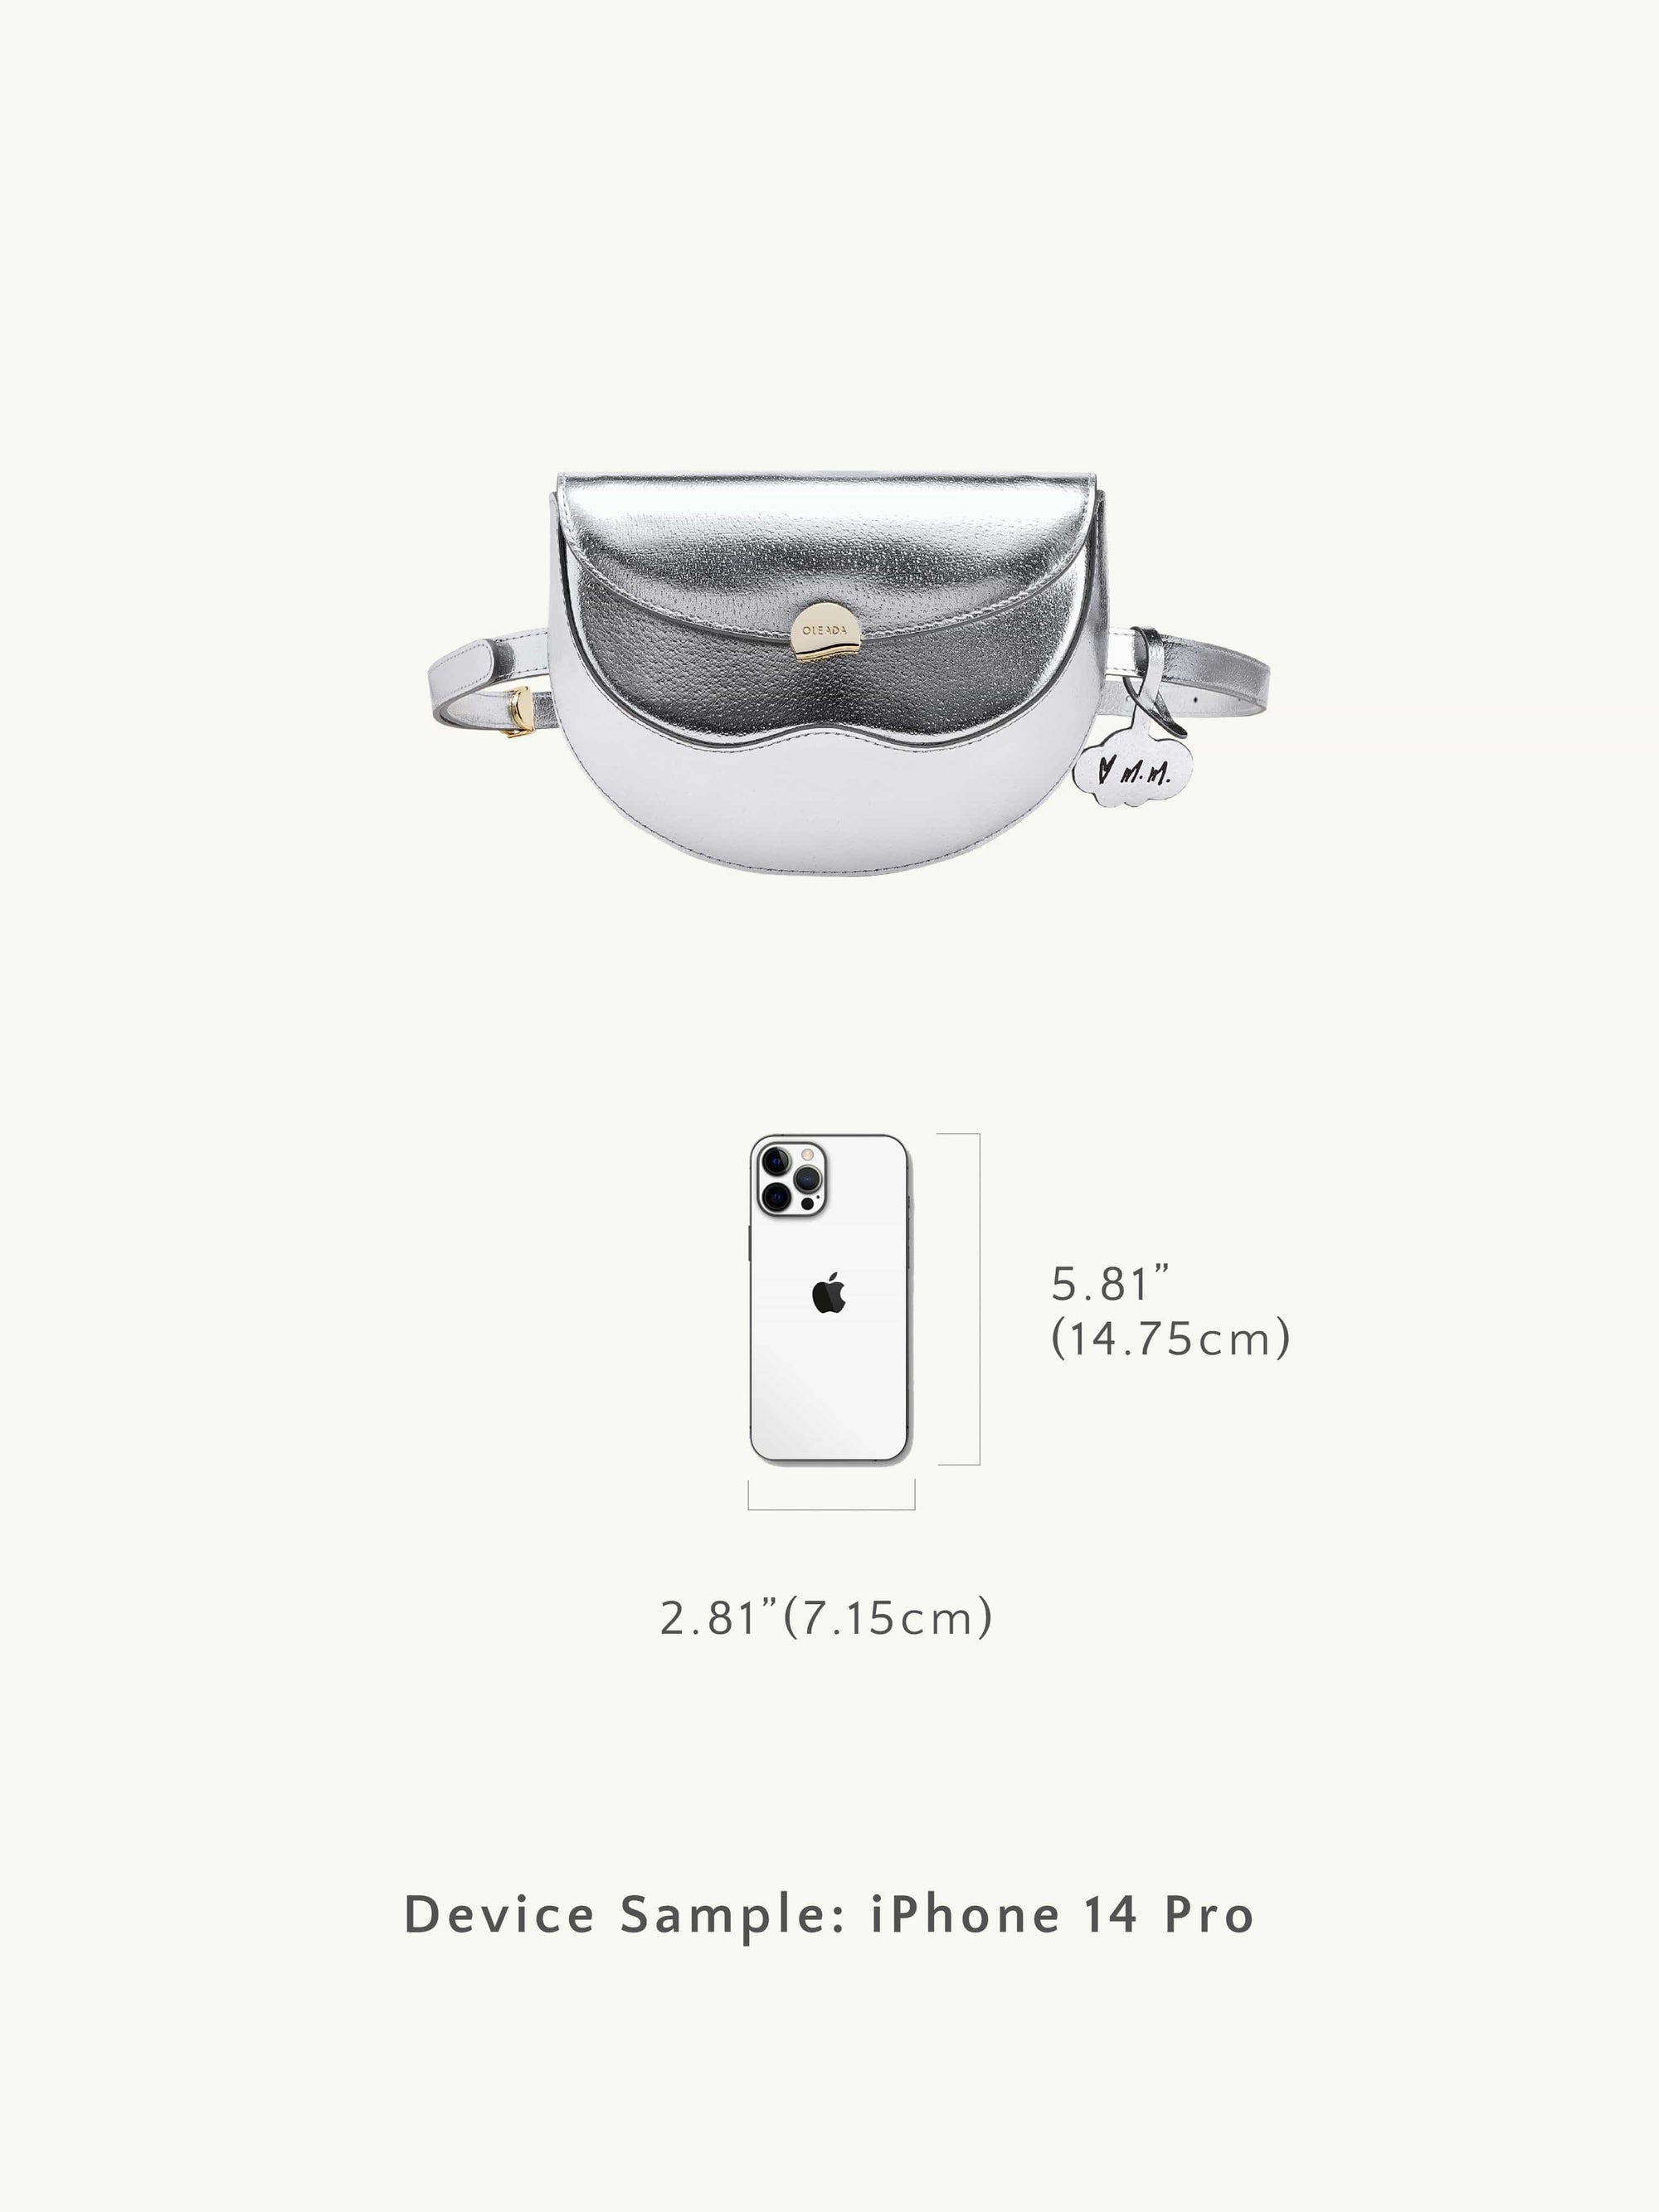 LouisVuitton Perfect Design Protection Airpods Pro Price in Pakistan